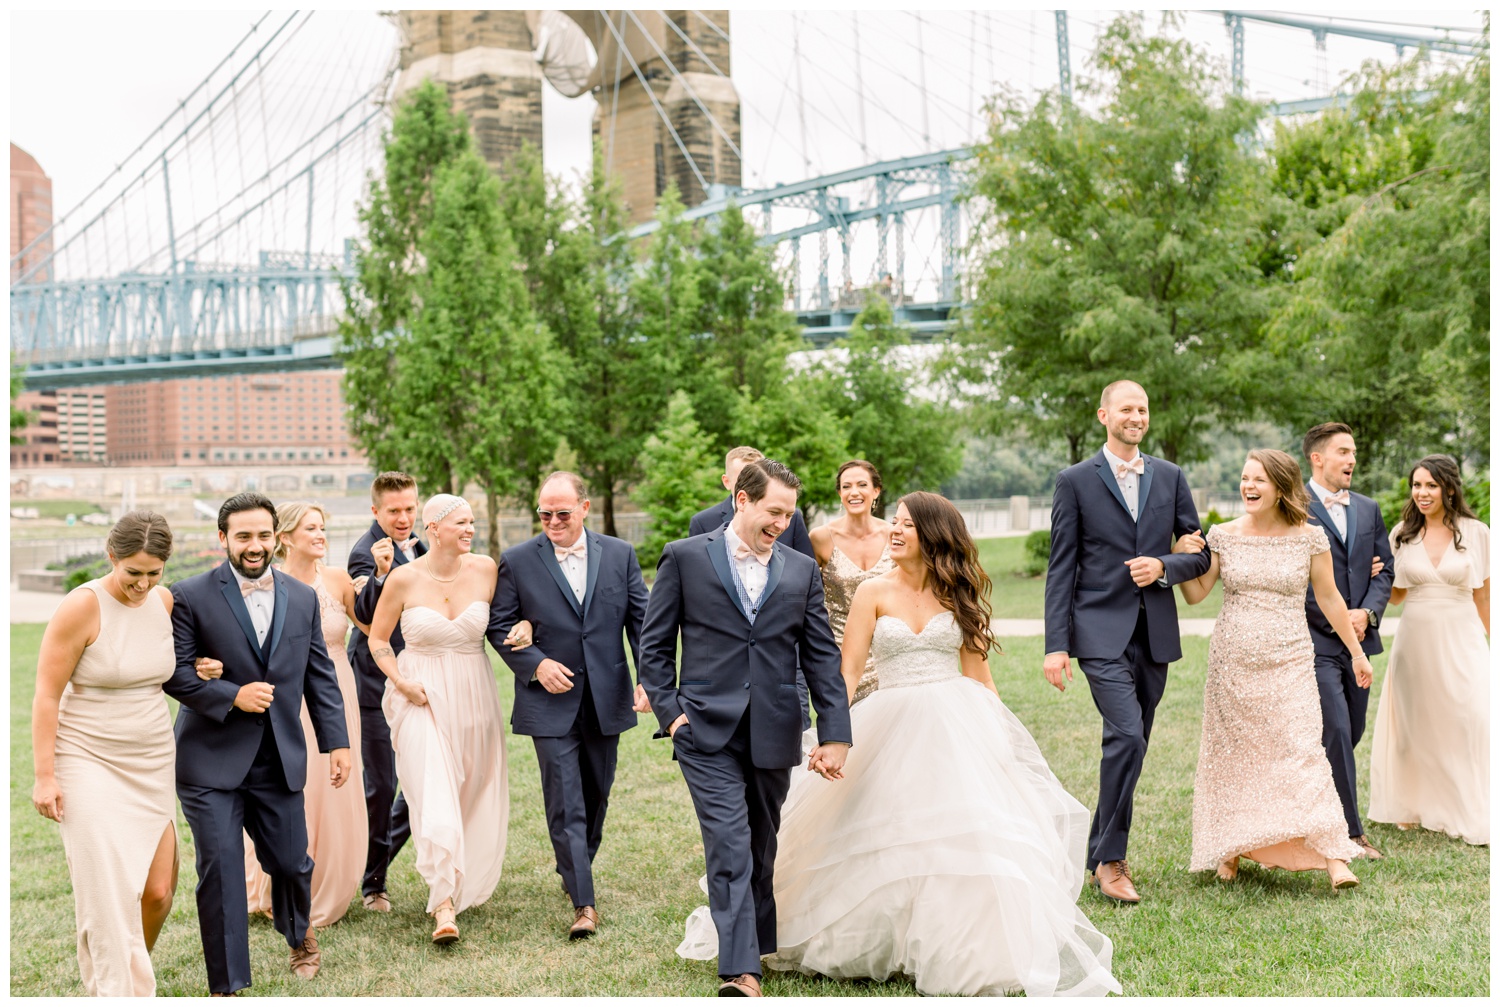 Bridal Party Walking at Smale Park in Front of Roebling Bridge